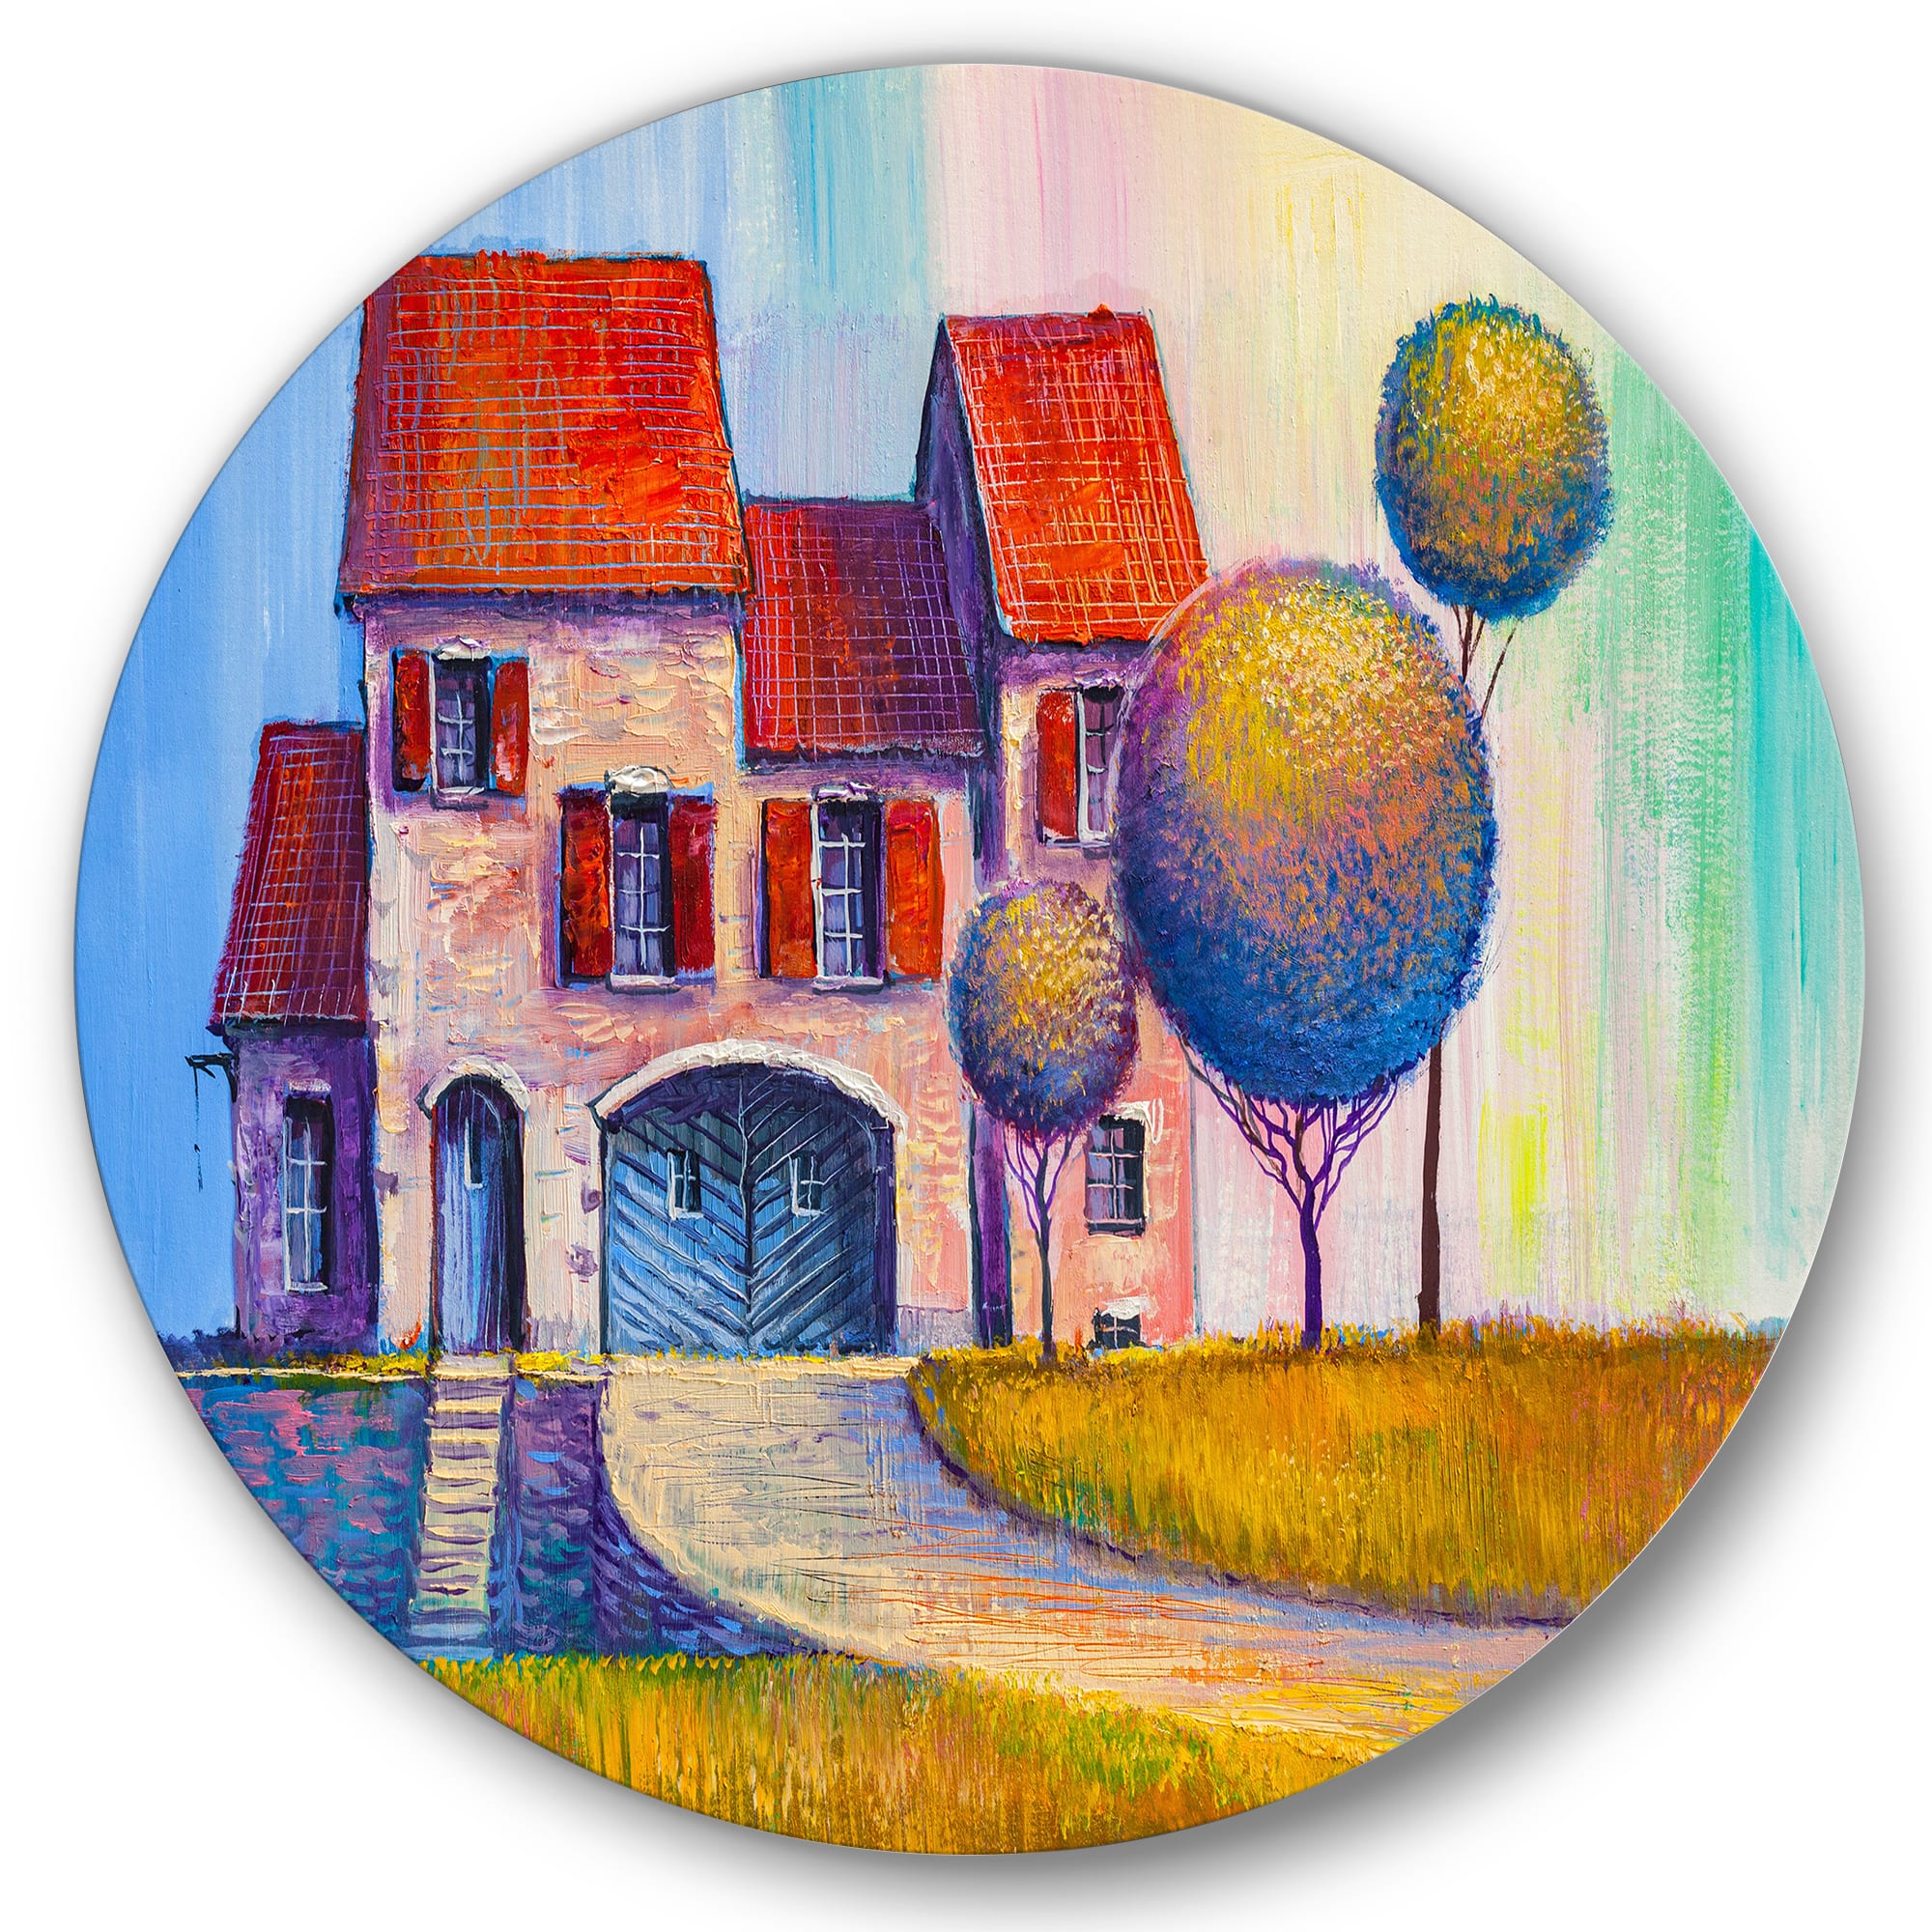 Designart - House With Red Roof In The Village - Modern Metal Circle Wall Art